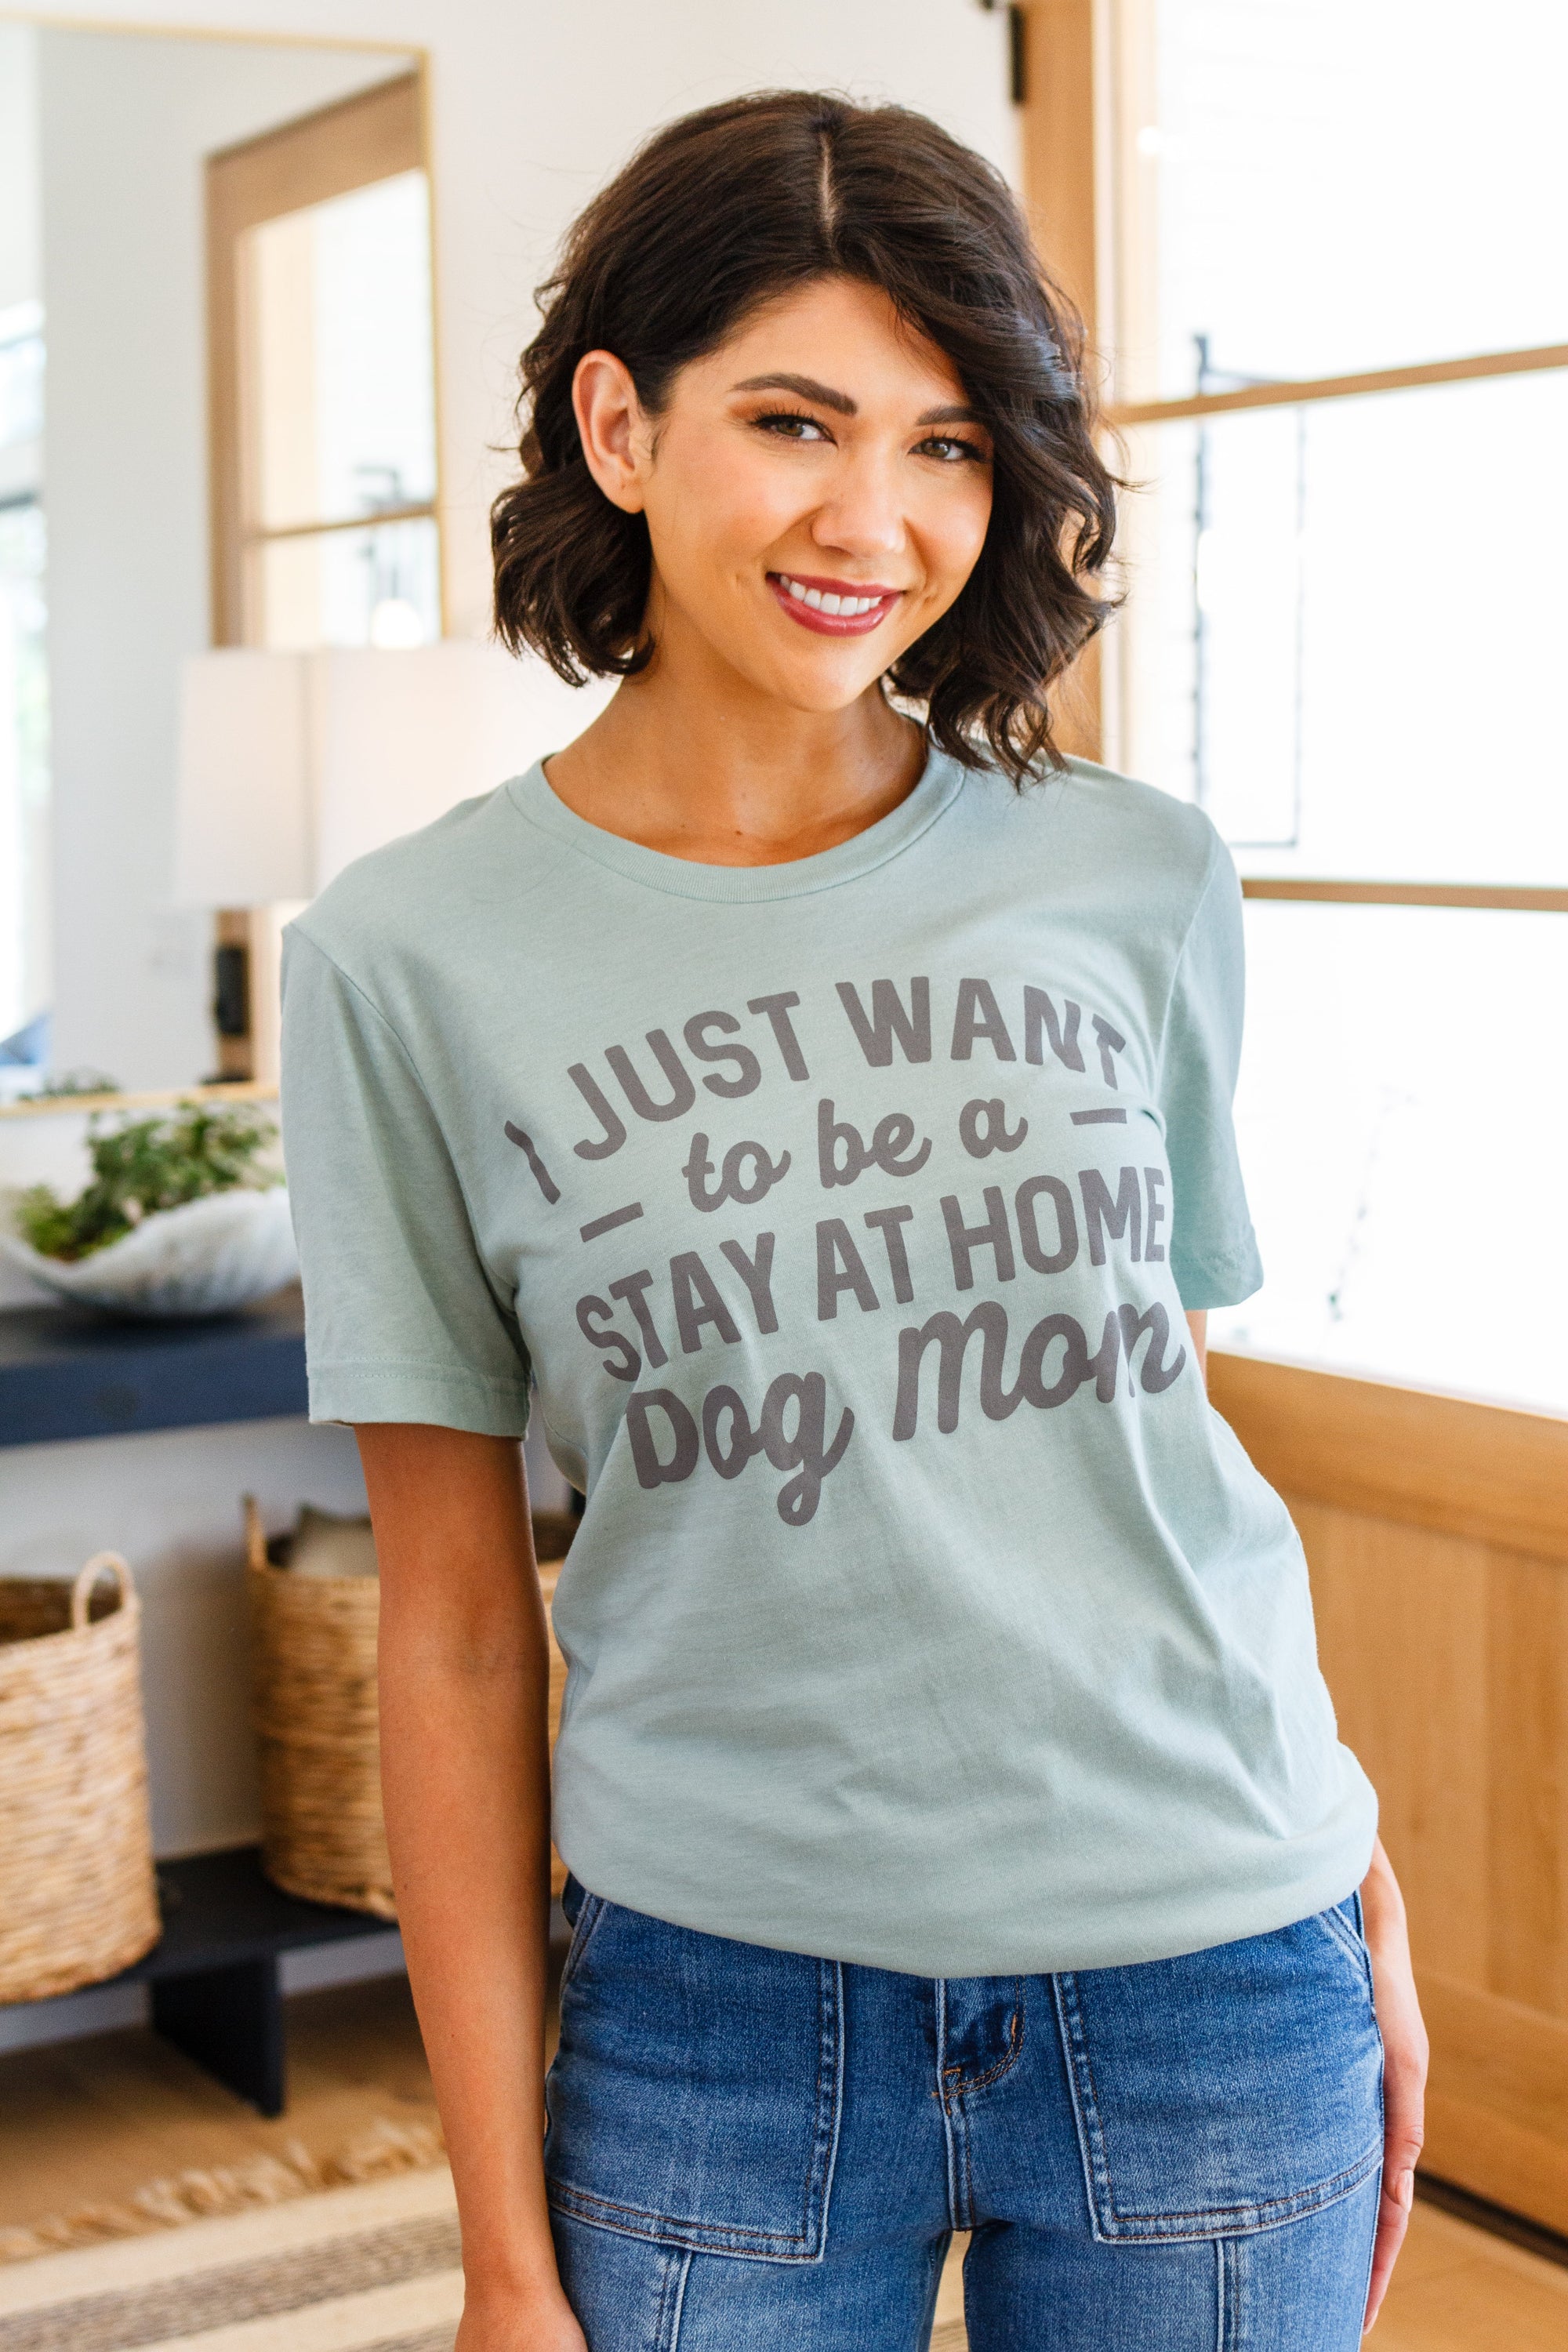 Stay At Home Dog Mom Graphic Tee-Womens-jsbecigarette Shop for Women & Kids